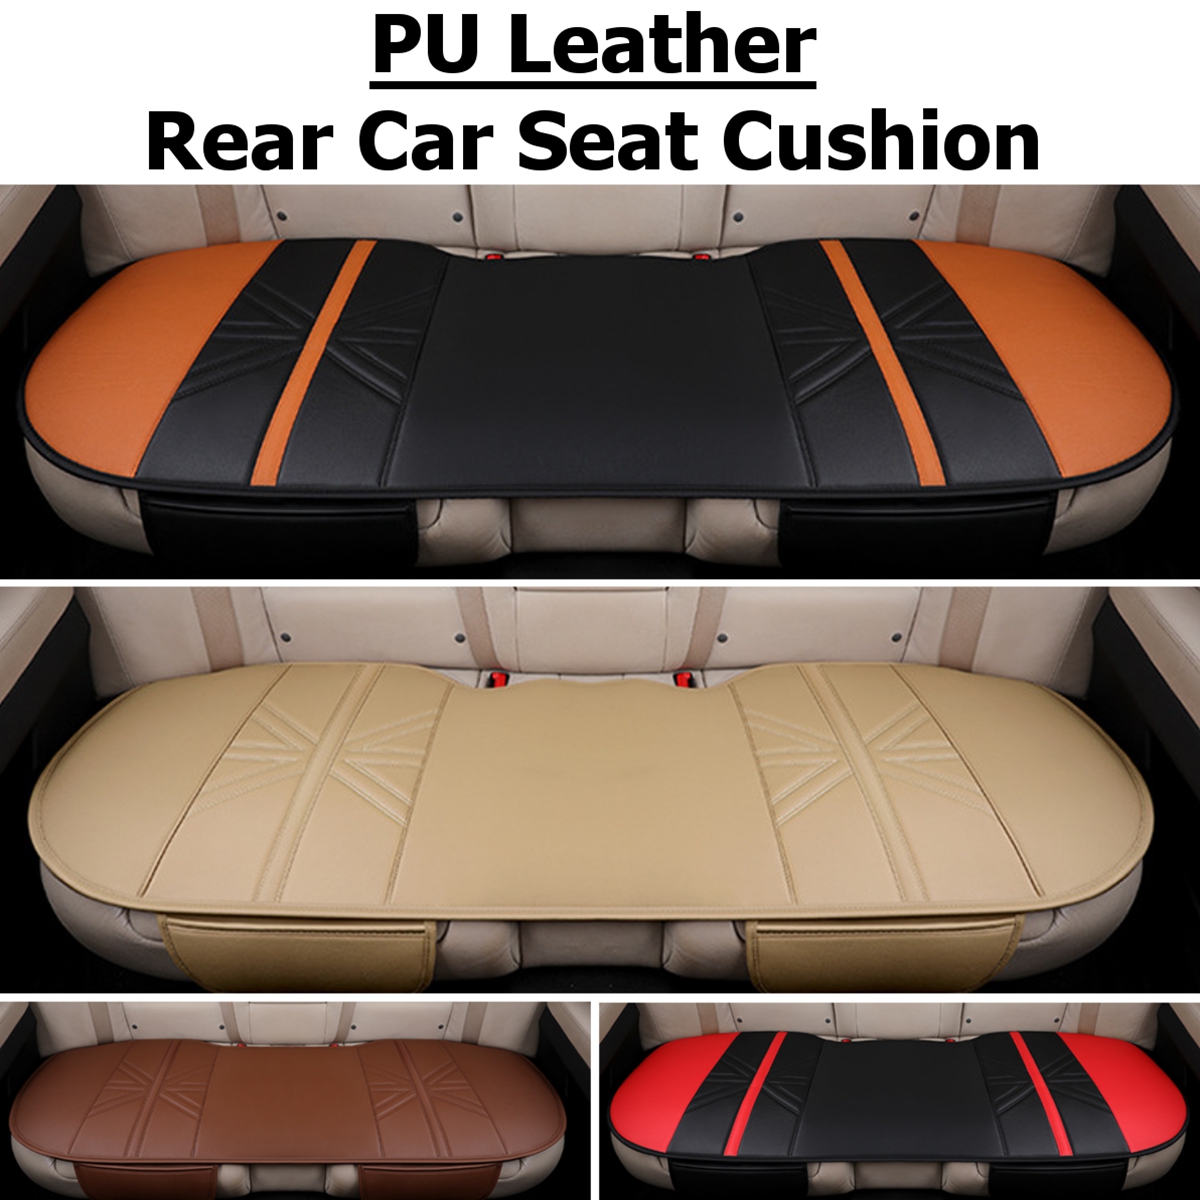 Car Rear Seat Mat Protector Cover Organizer PU Leather Breathable Cushion Pad